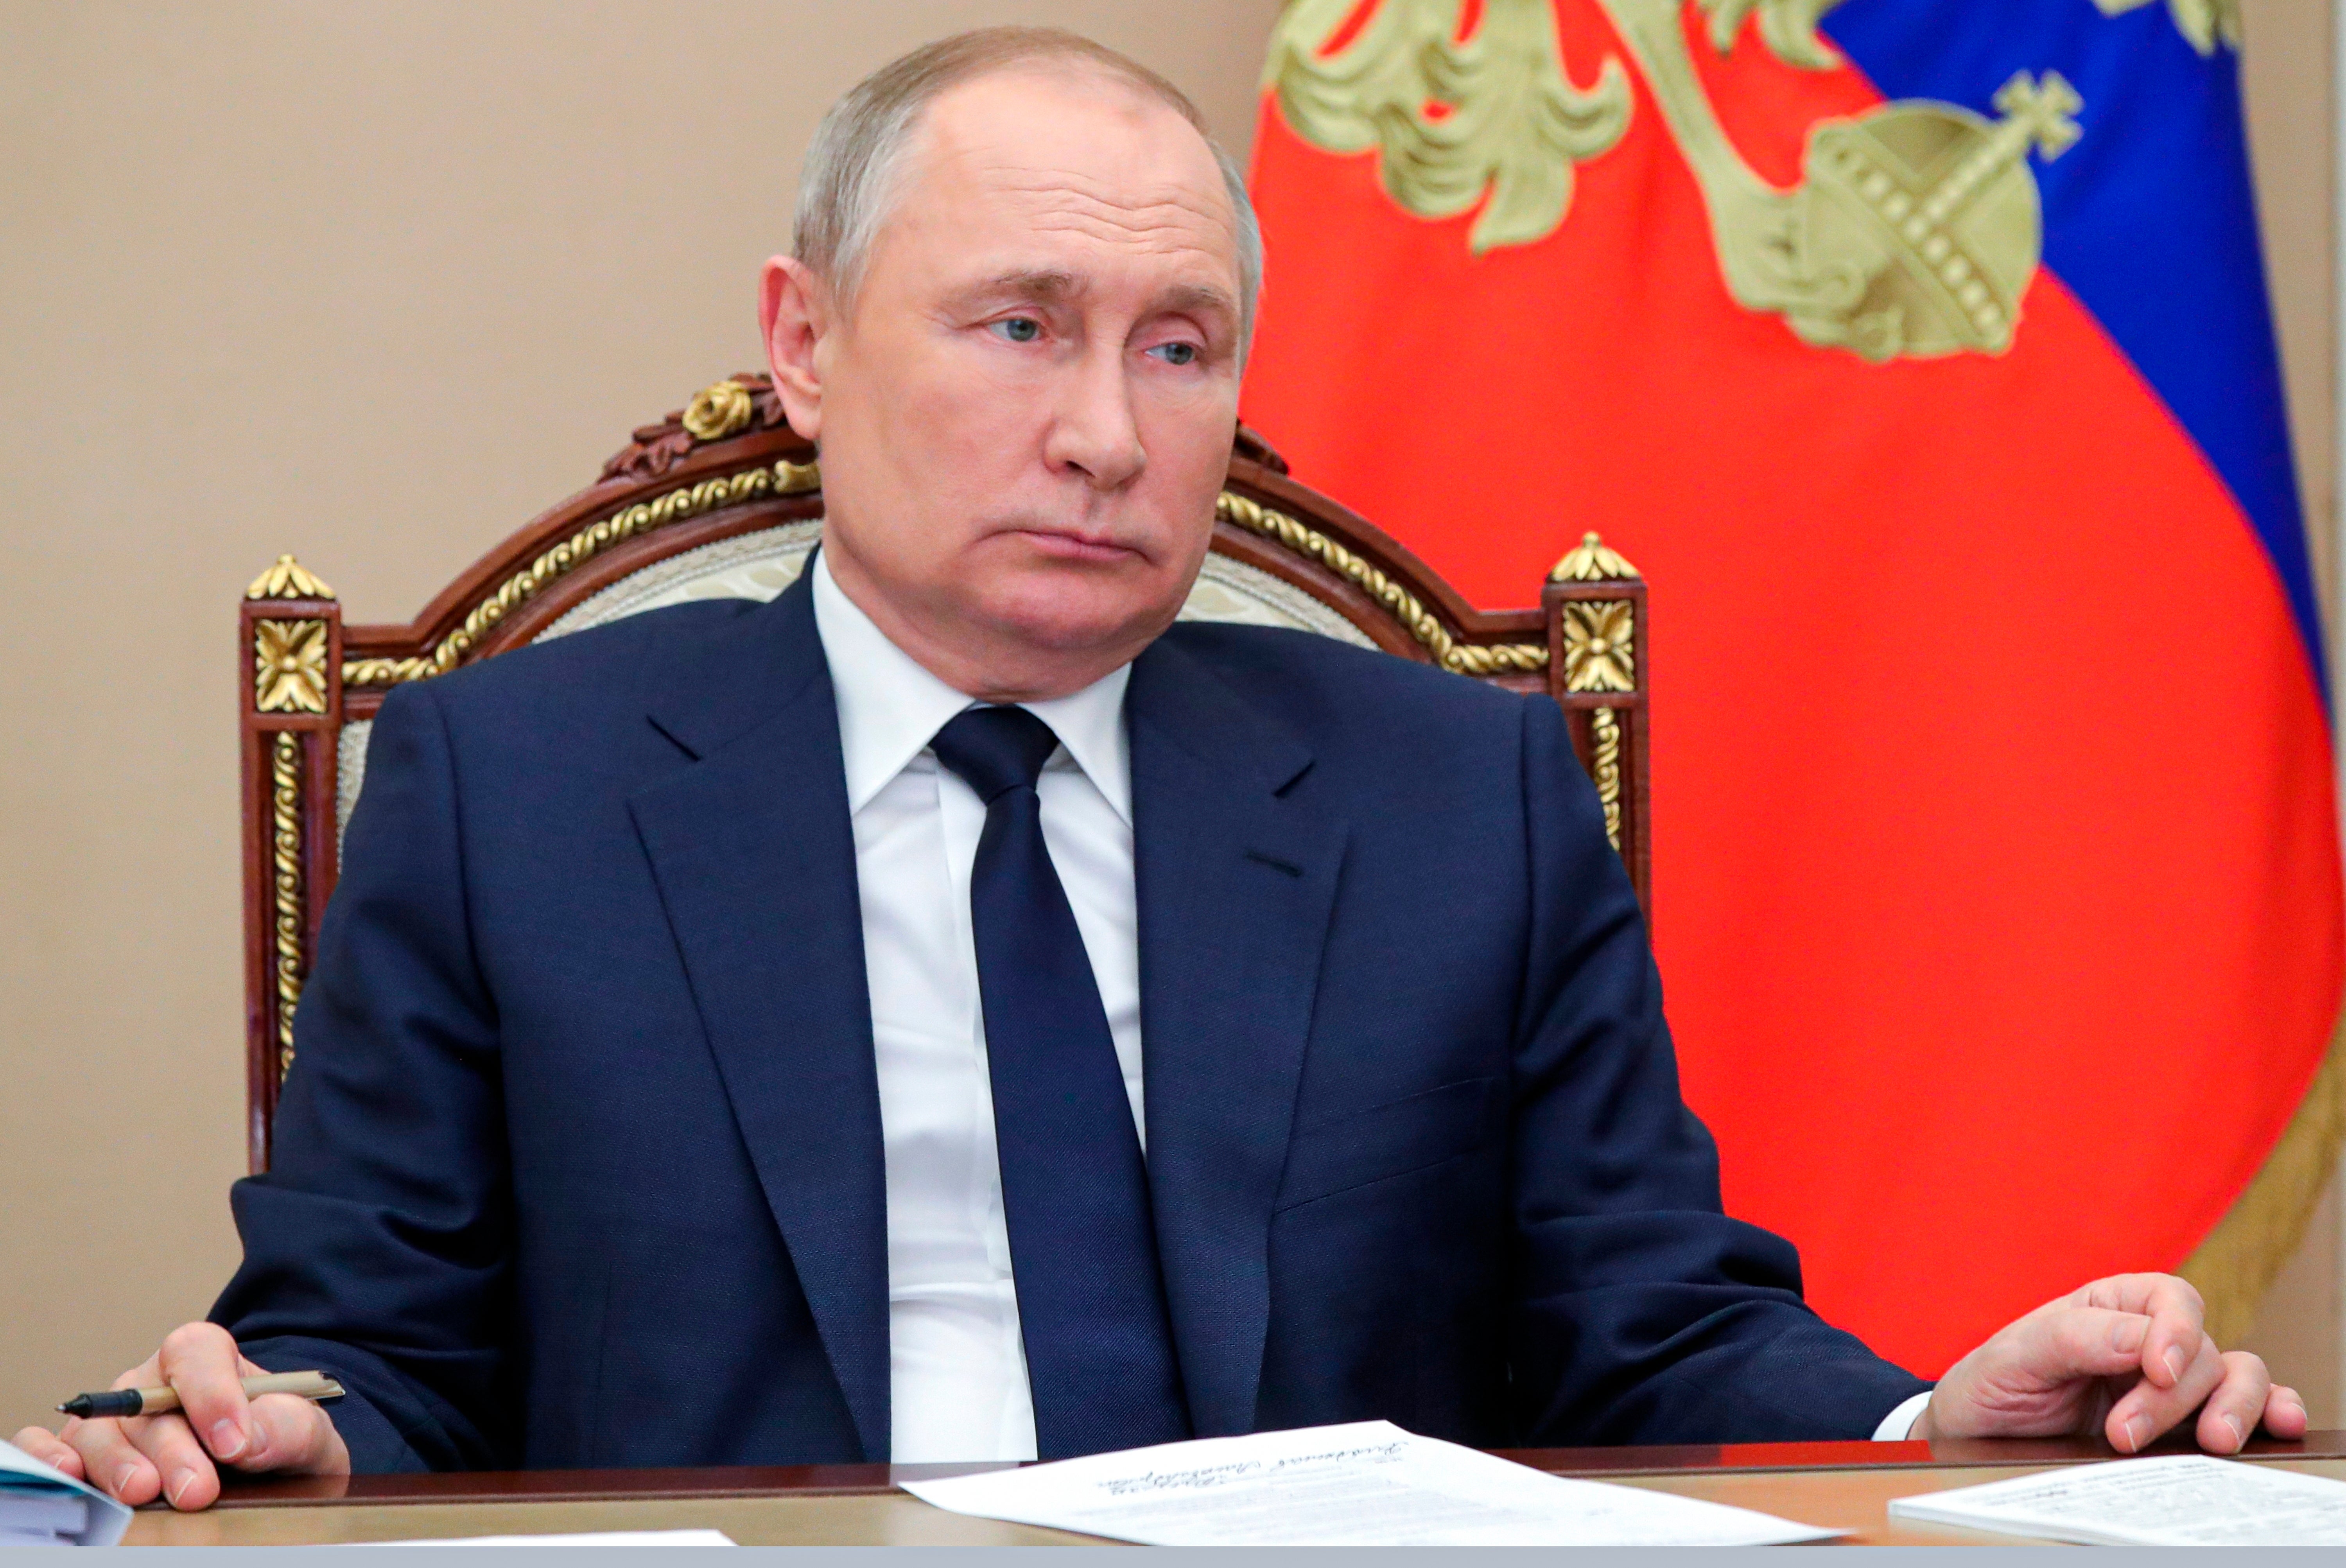 Russian president Vladimir Putin says he won’t be deterred by sanctions on oligarchs